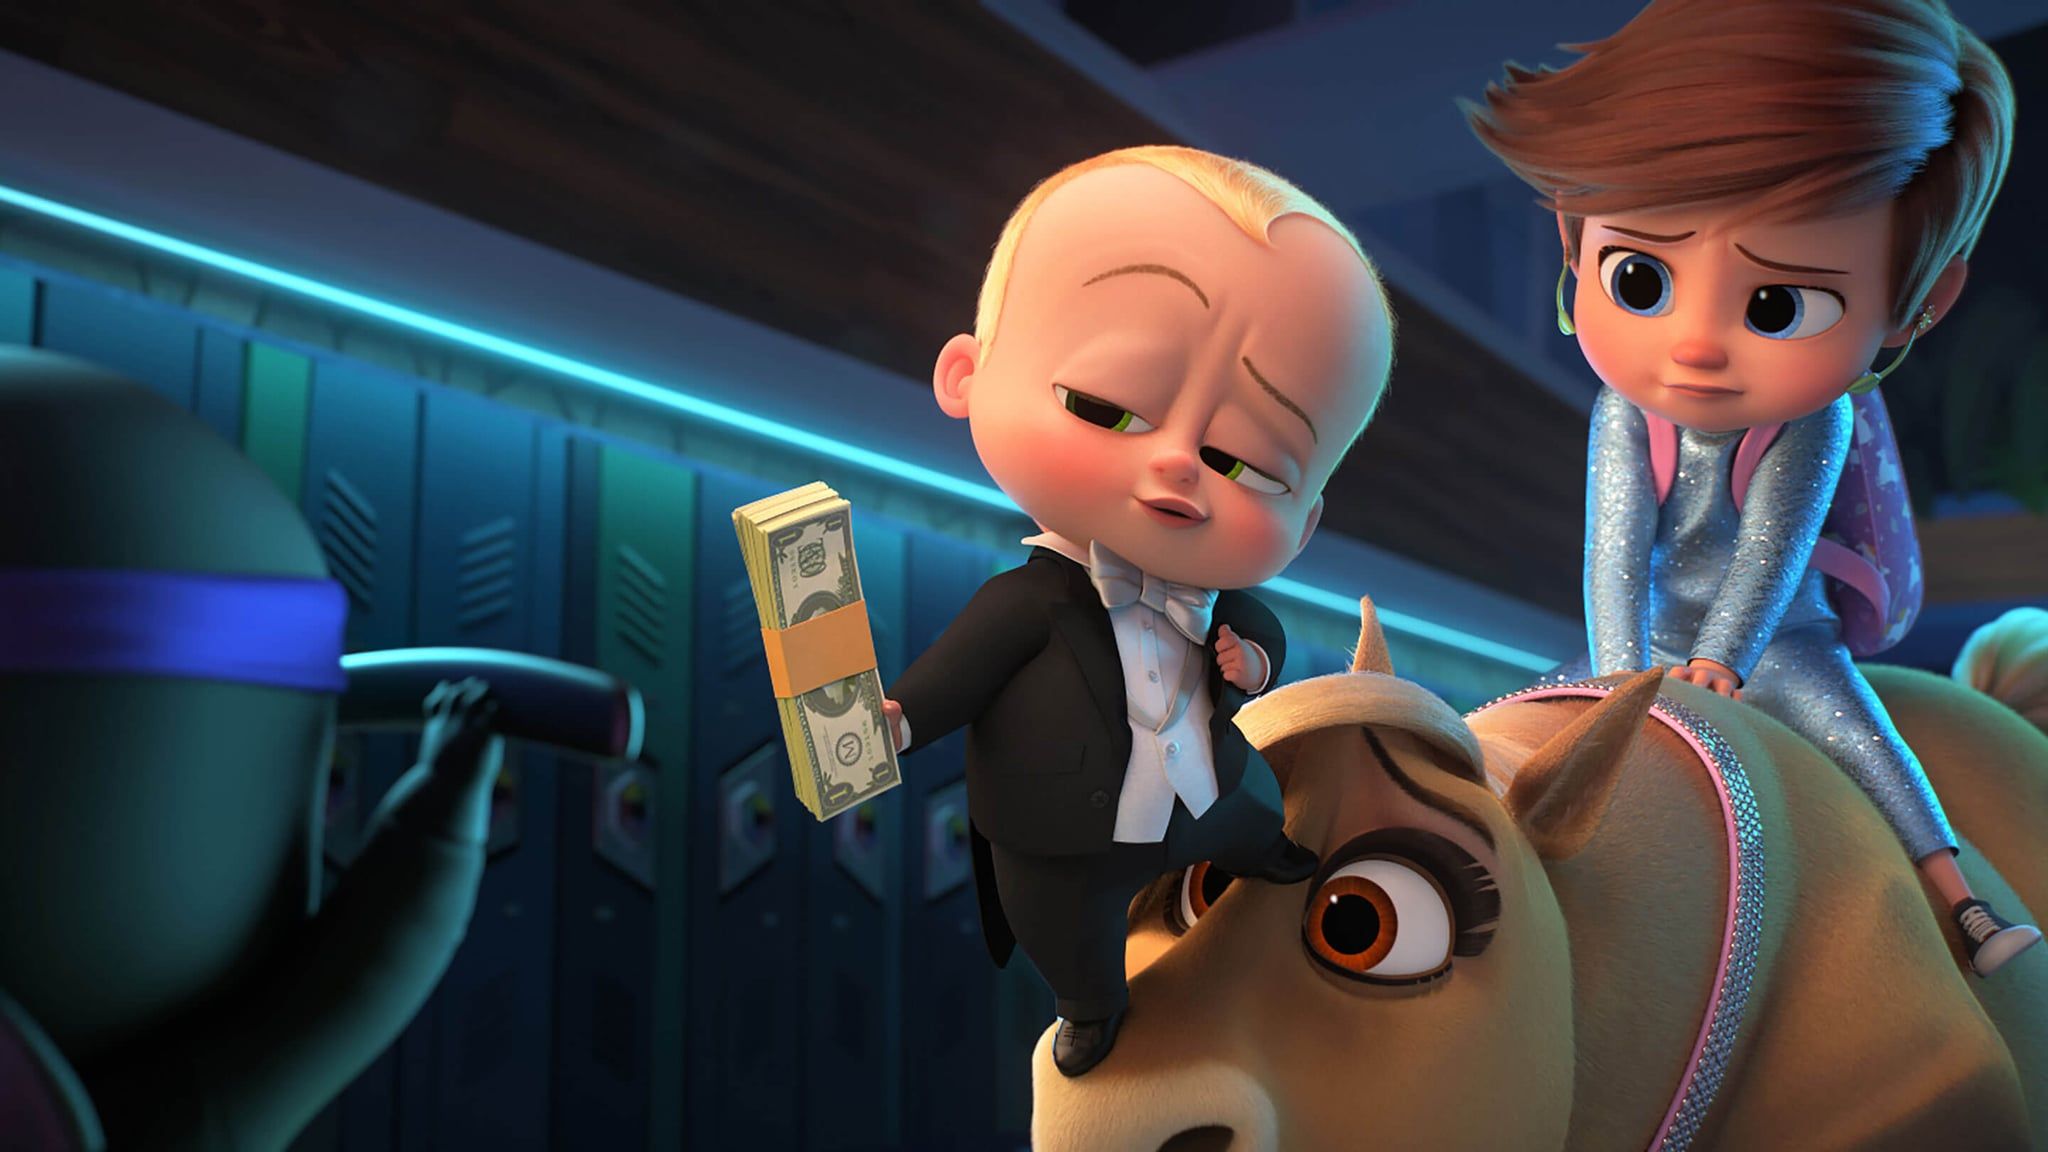 The boss baby wallpapers